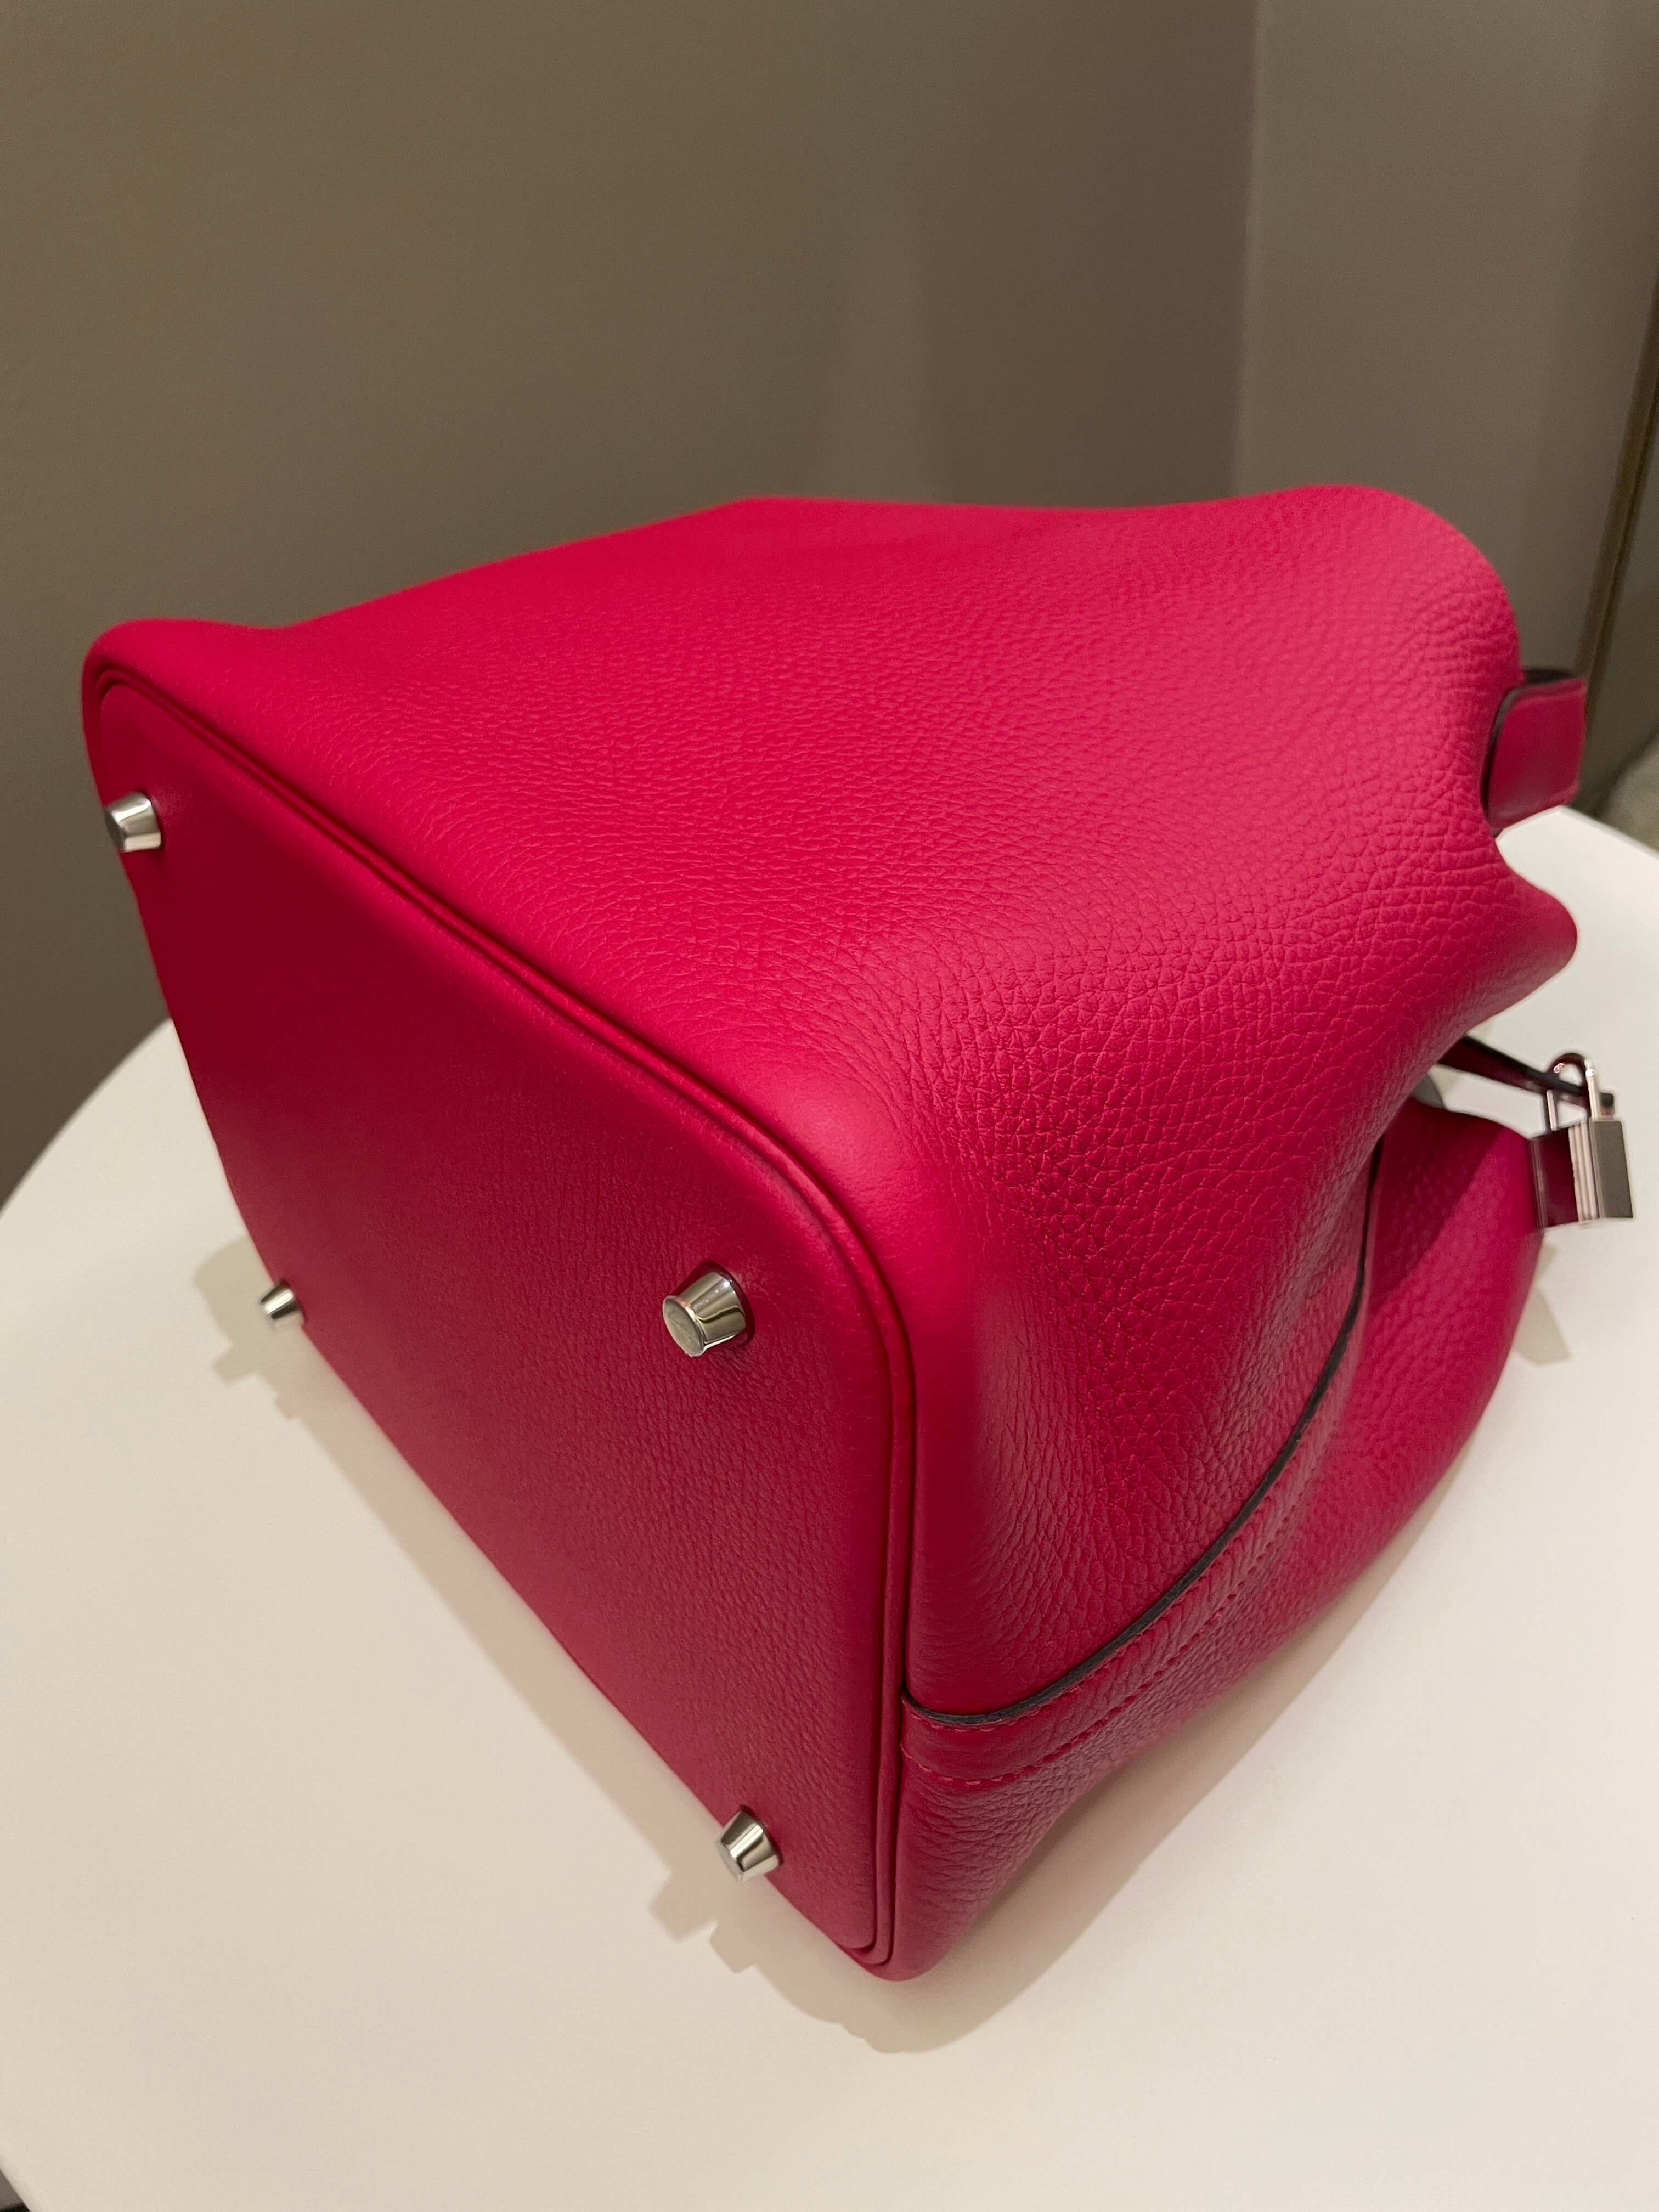 HERMES Picotin Lock Eclat bag PM Framboise/Rouge sellier Clemence  leather/Swift leather Silver hardware #LecrinBoutiqueSingapore #hermes…